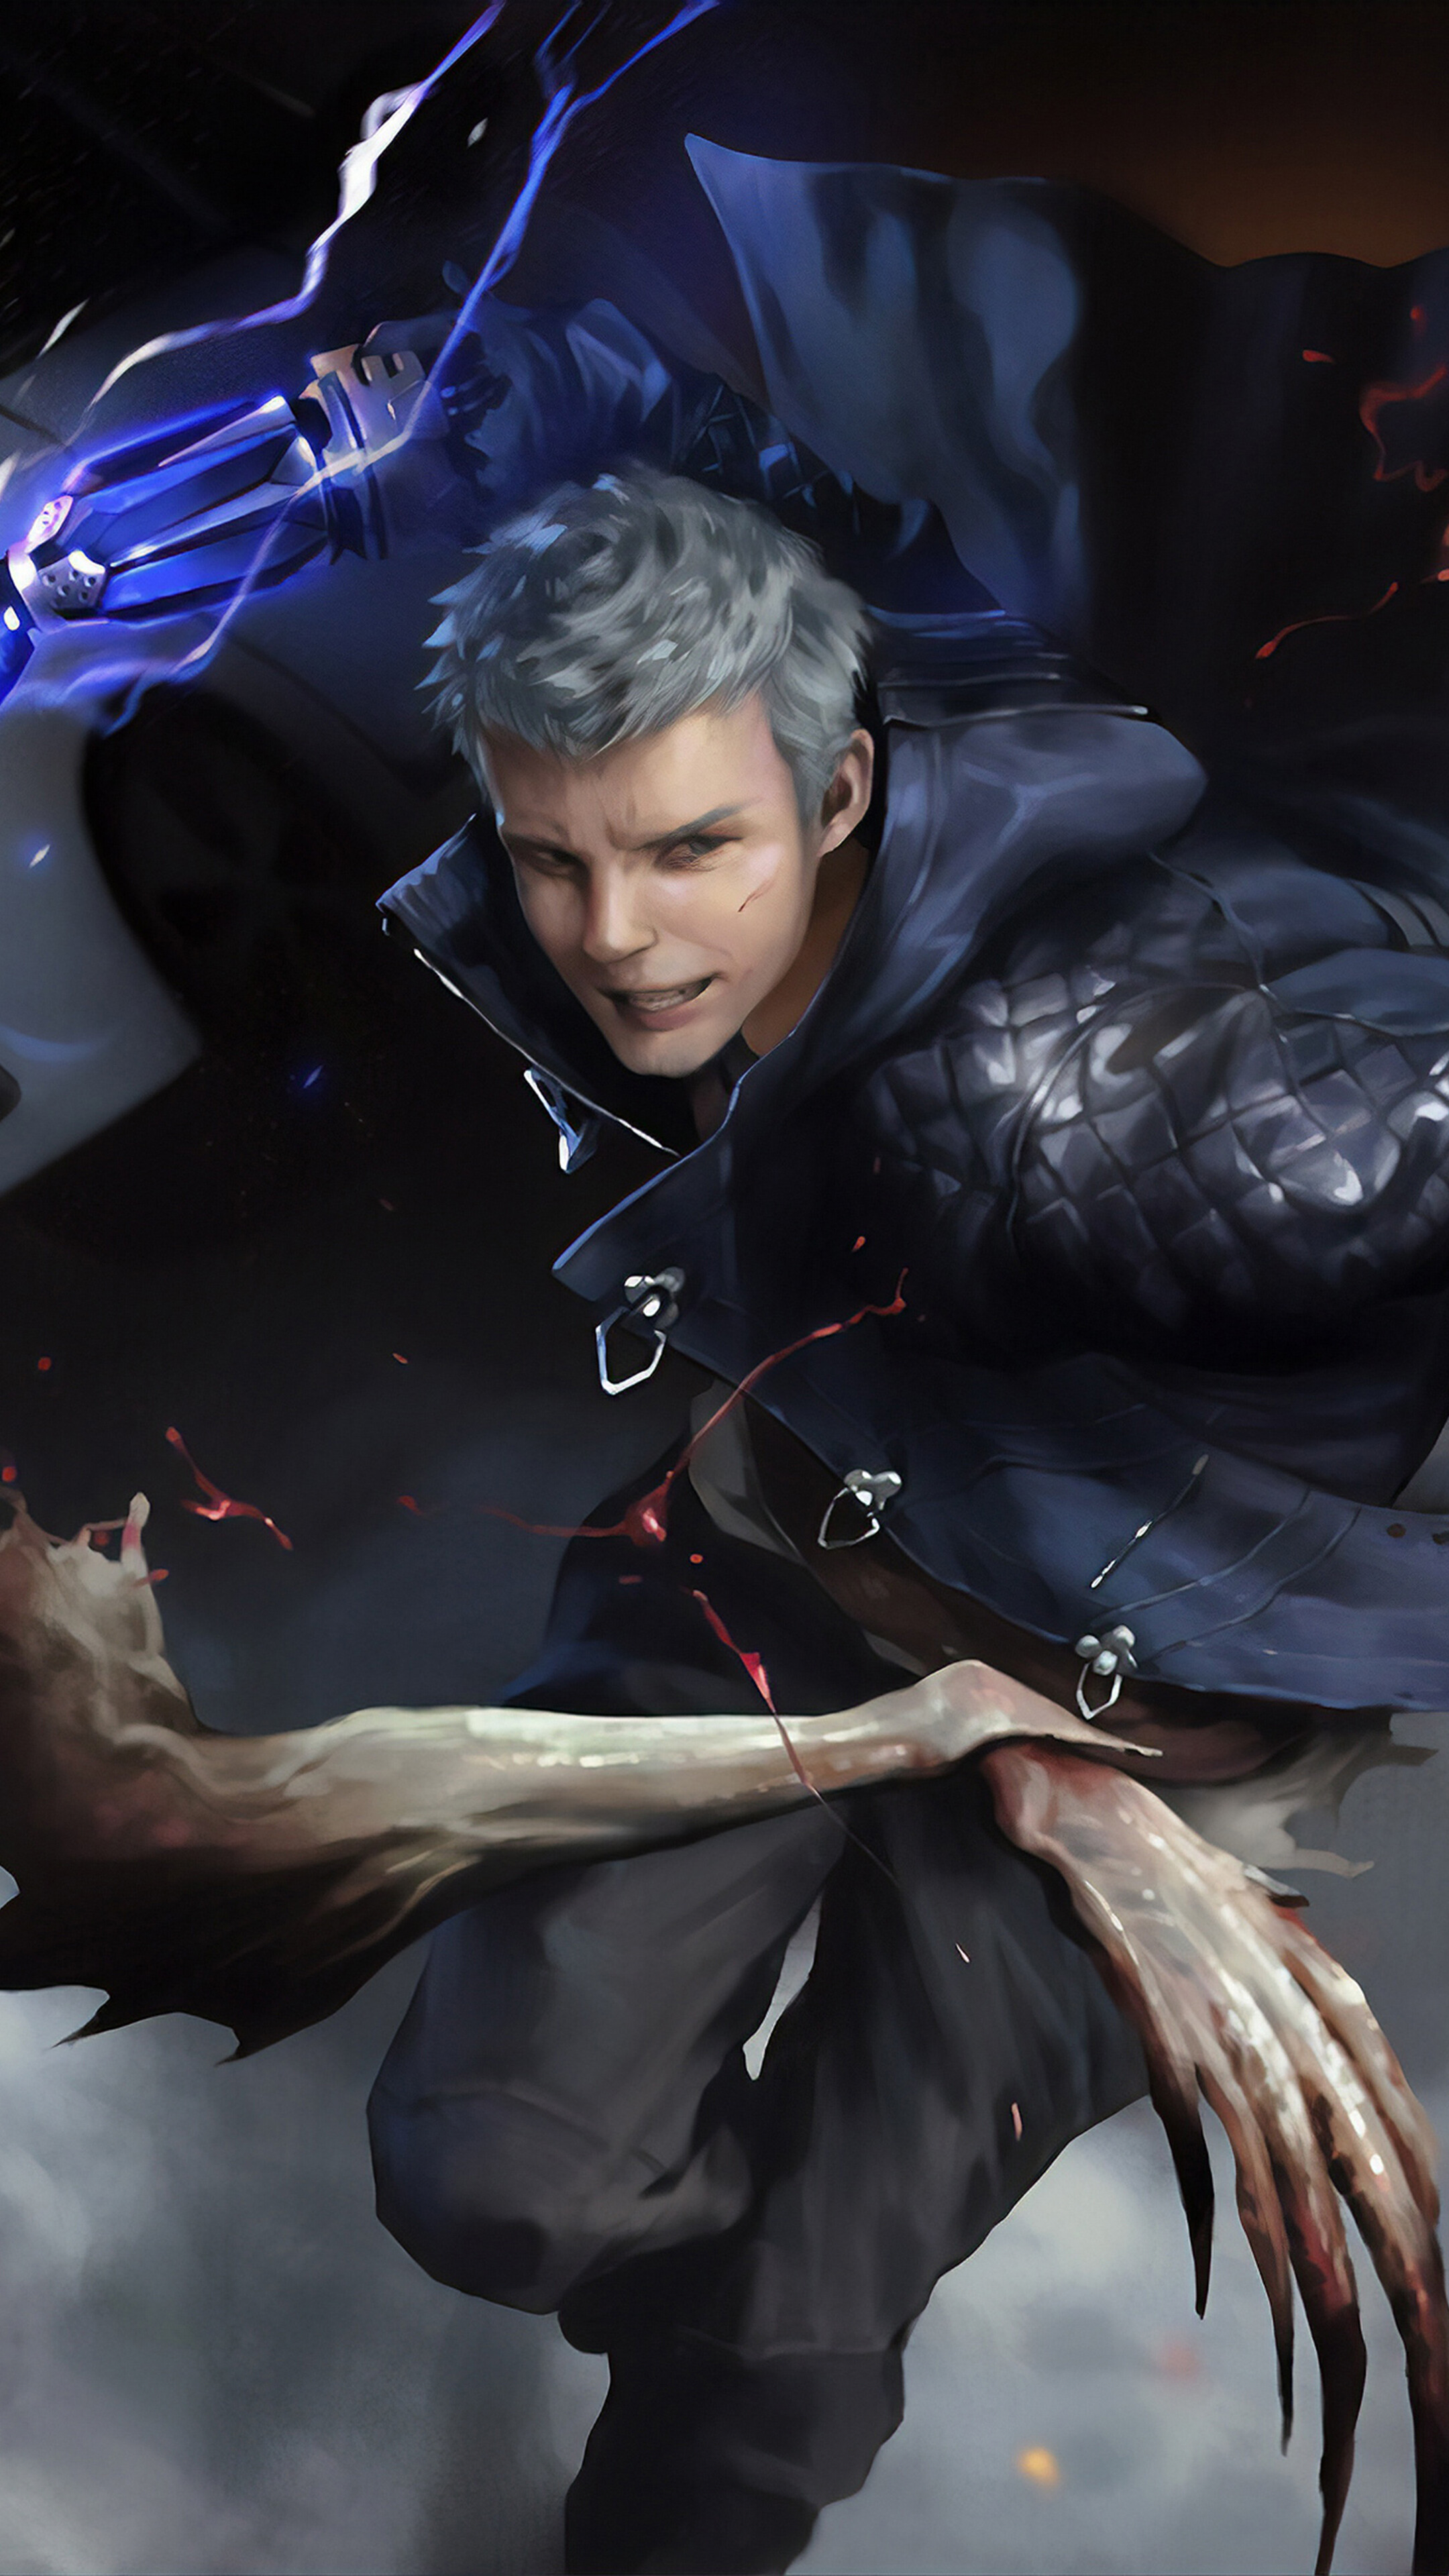 I always struggled to find a DMC wallpaper I like and friend made this one  for me so I wanted to share it with all of you btw hes practicing   rDevilMayCry